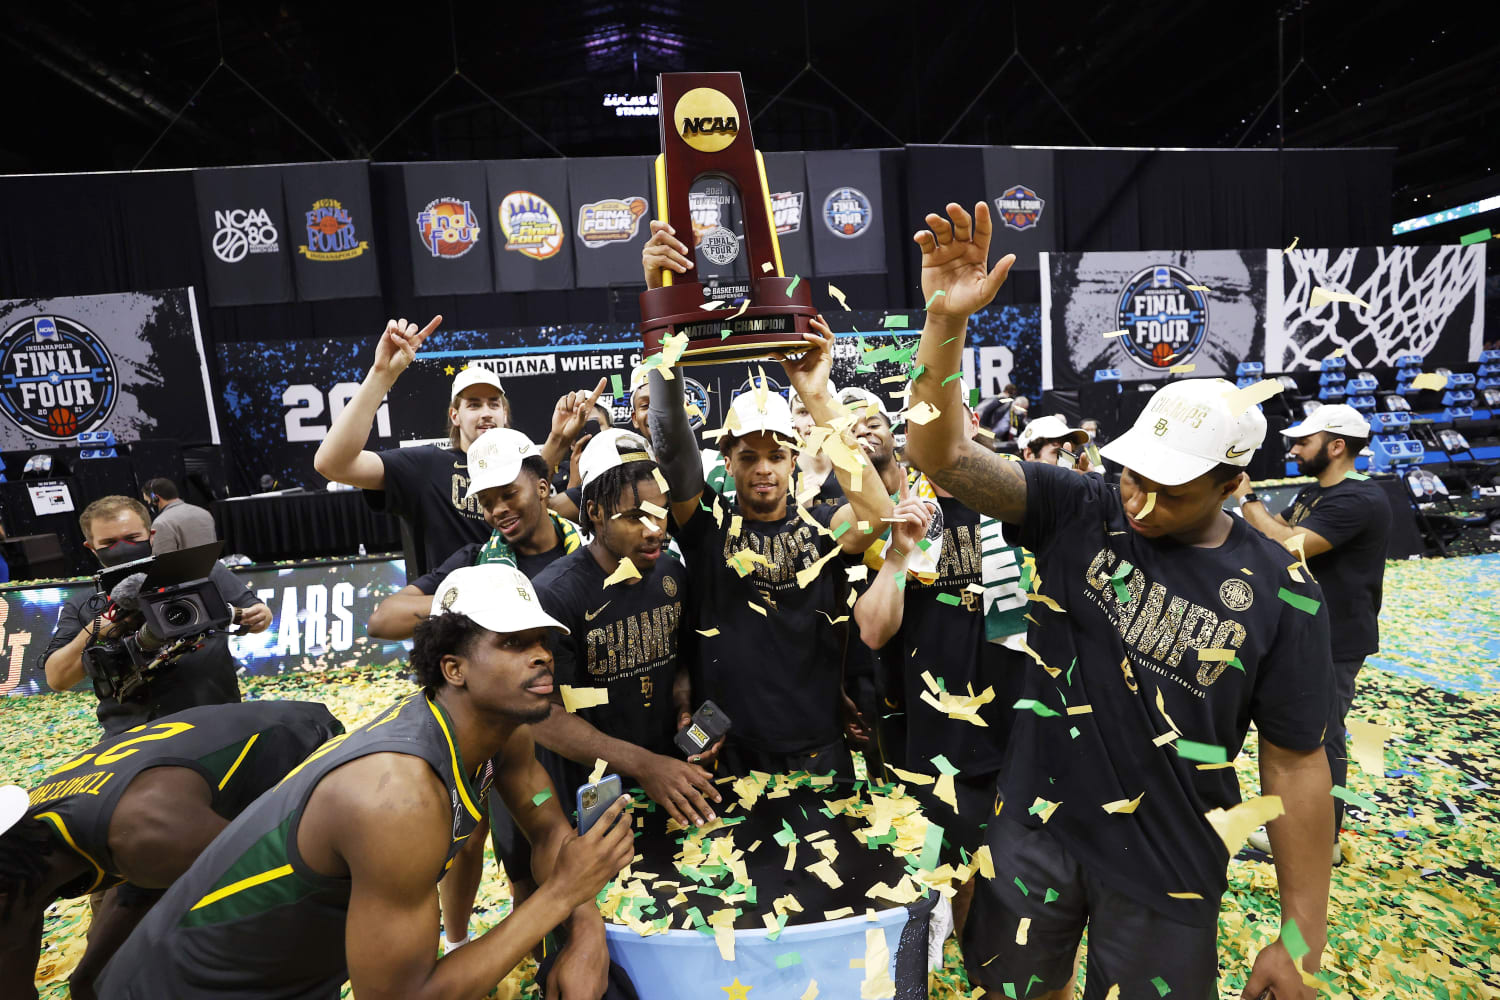 Baylor denies Gonzagas bid for perfection, wins first mens basketball championship